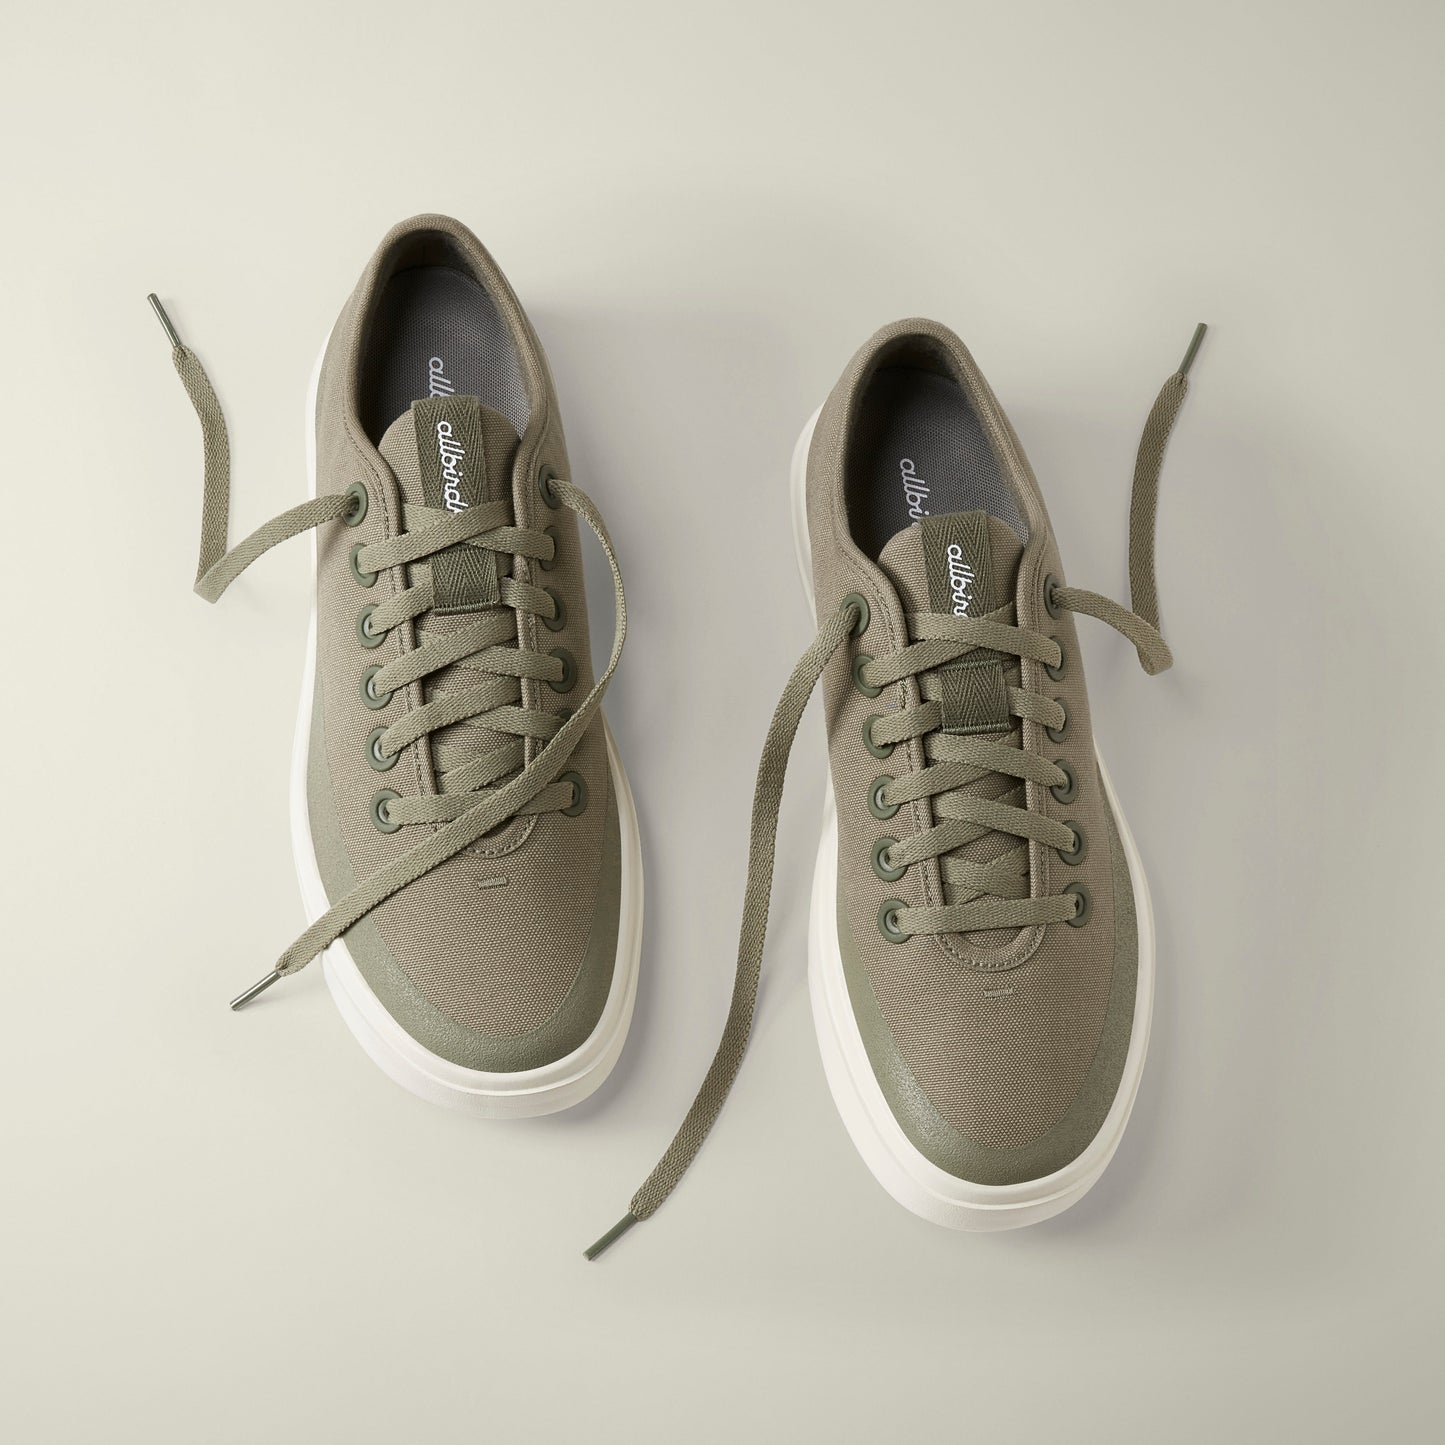 Men's Canvas Pipers